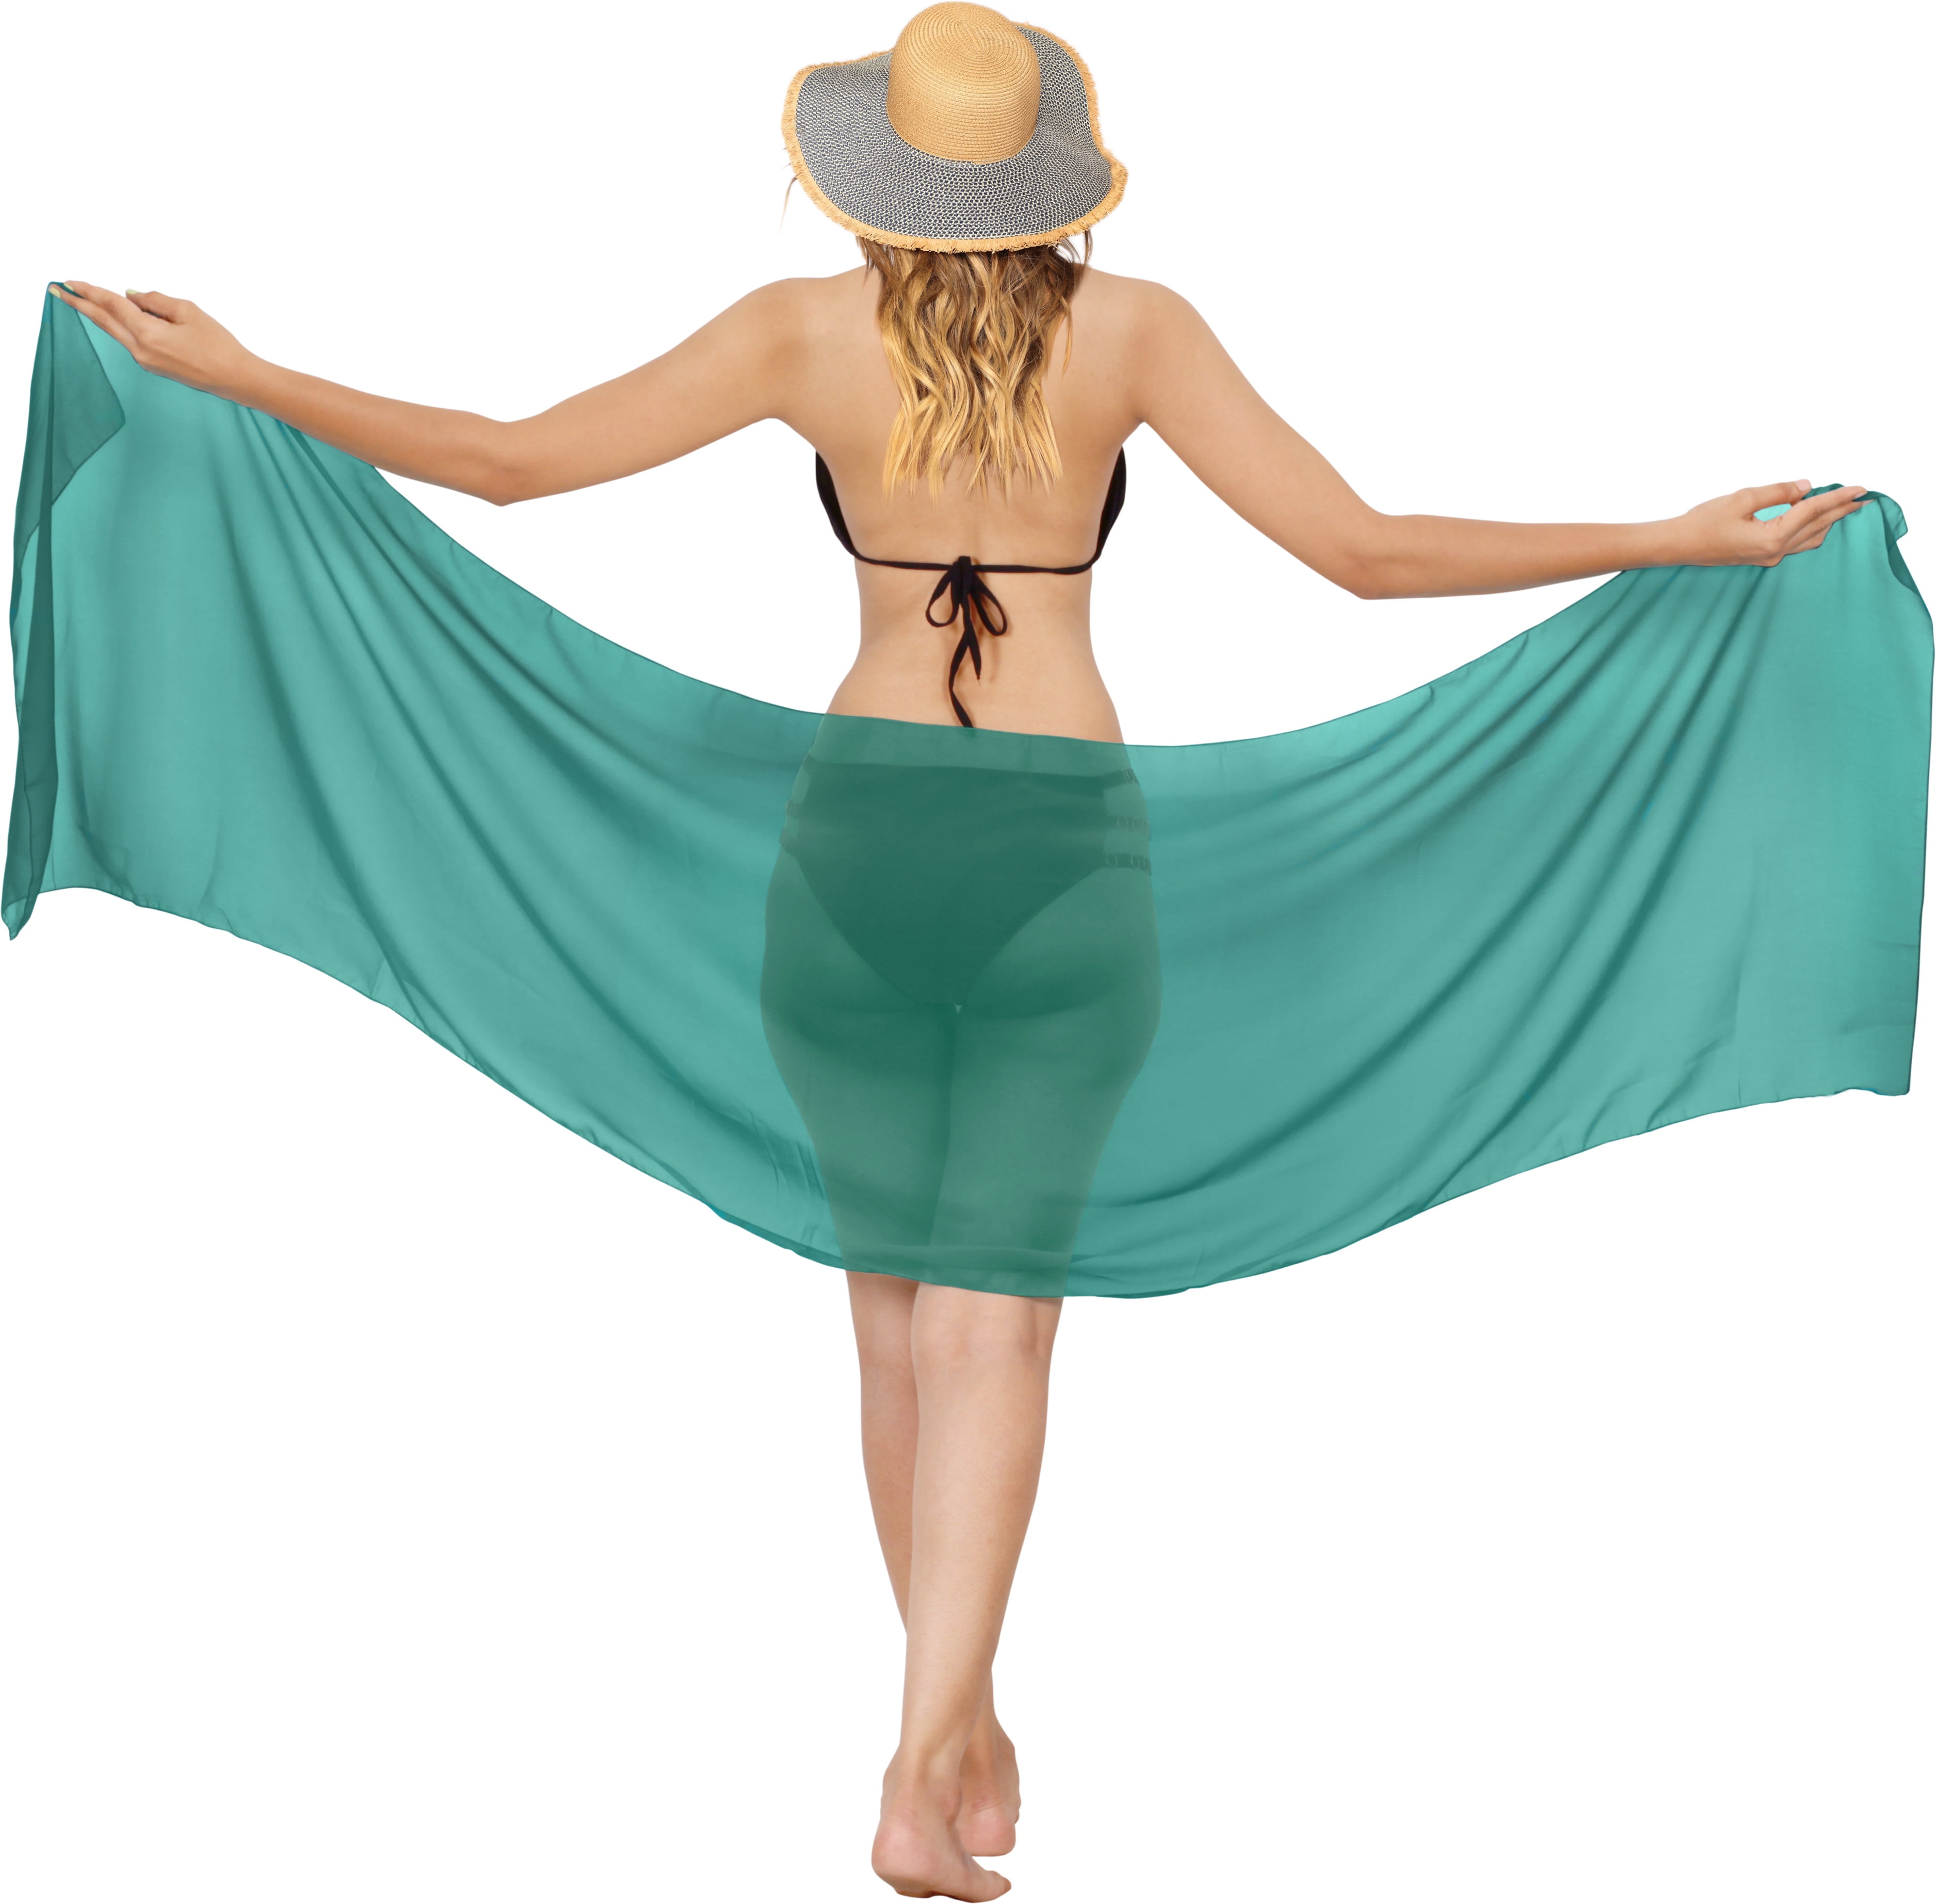 HAPPY BAY Women's Bikini Wraps Beach Wrap Cover up Sarong Skirt Swimsuit  Swimwear Bathing Suit Cover Ups for Womens One Size Mint